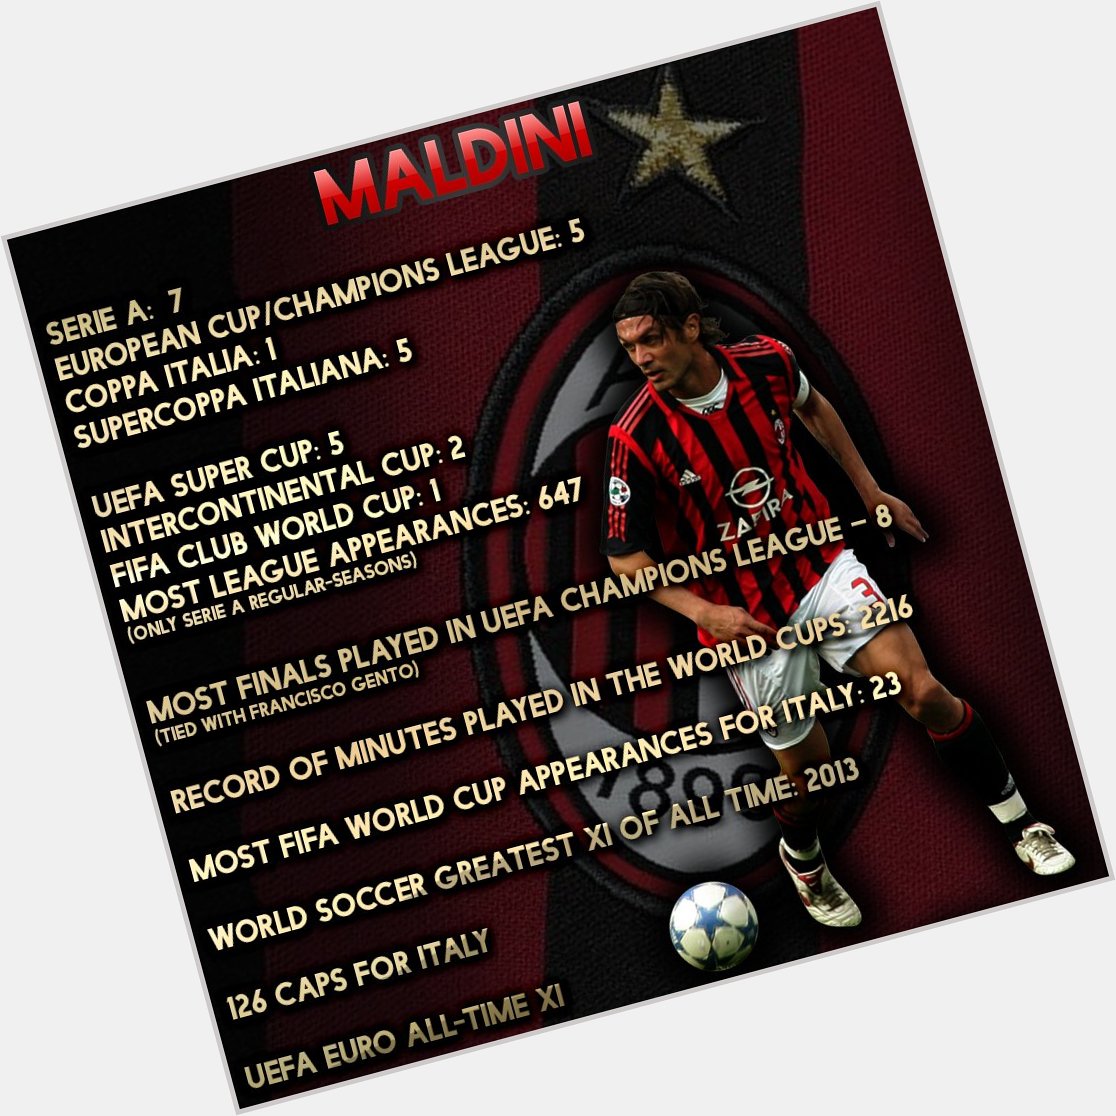 On this in 1968, one of the greatest defenders of all time was born ............ Happy birthday Paolo Maldini.  